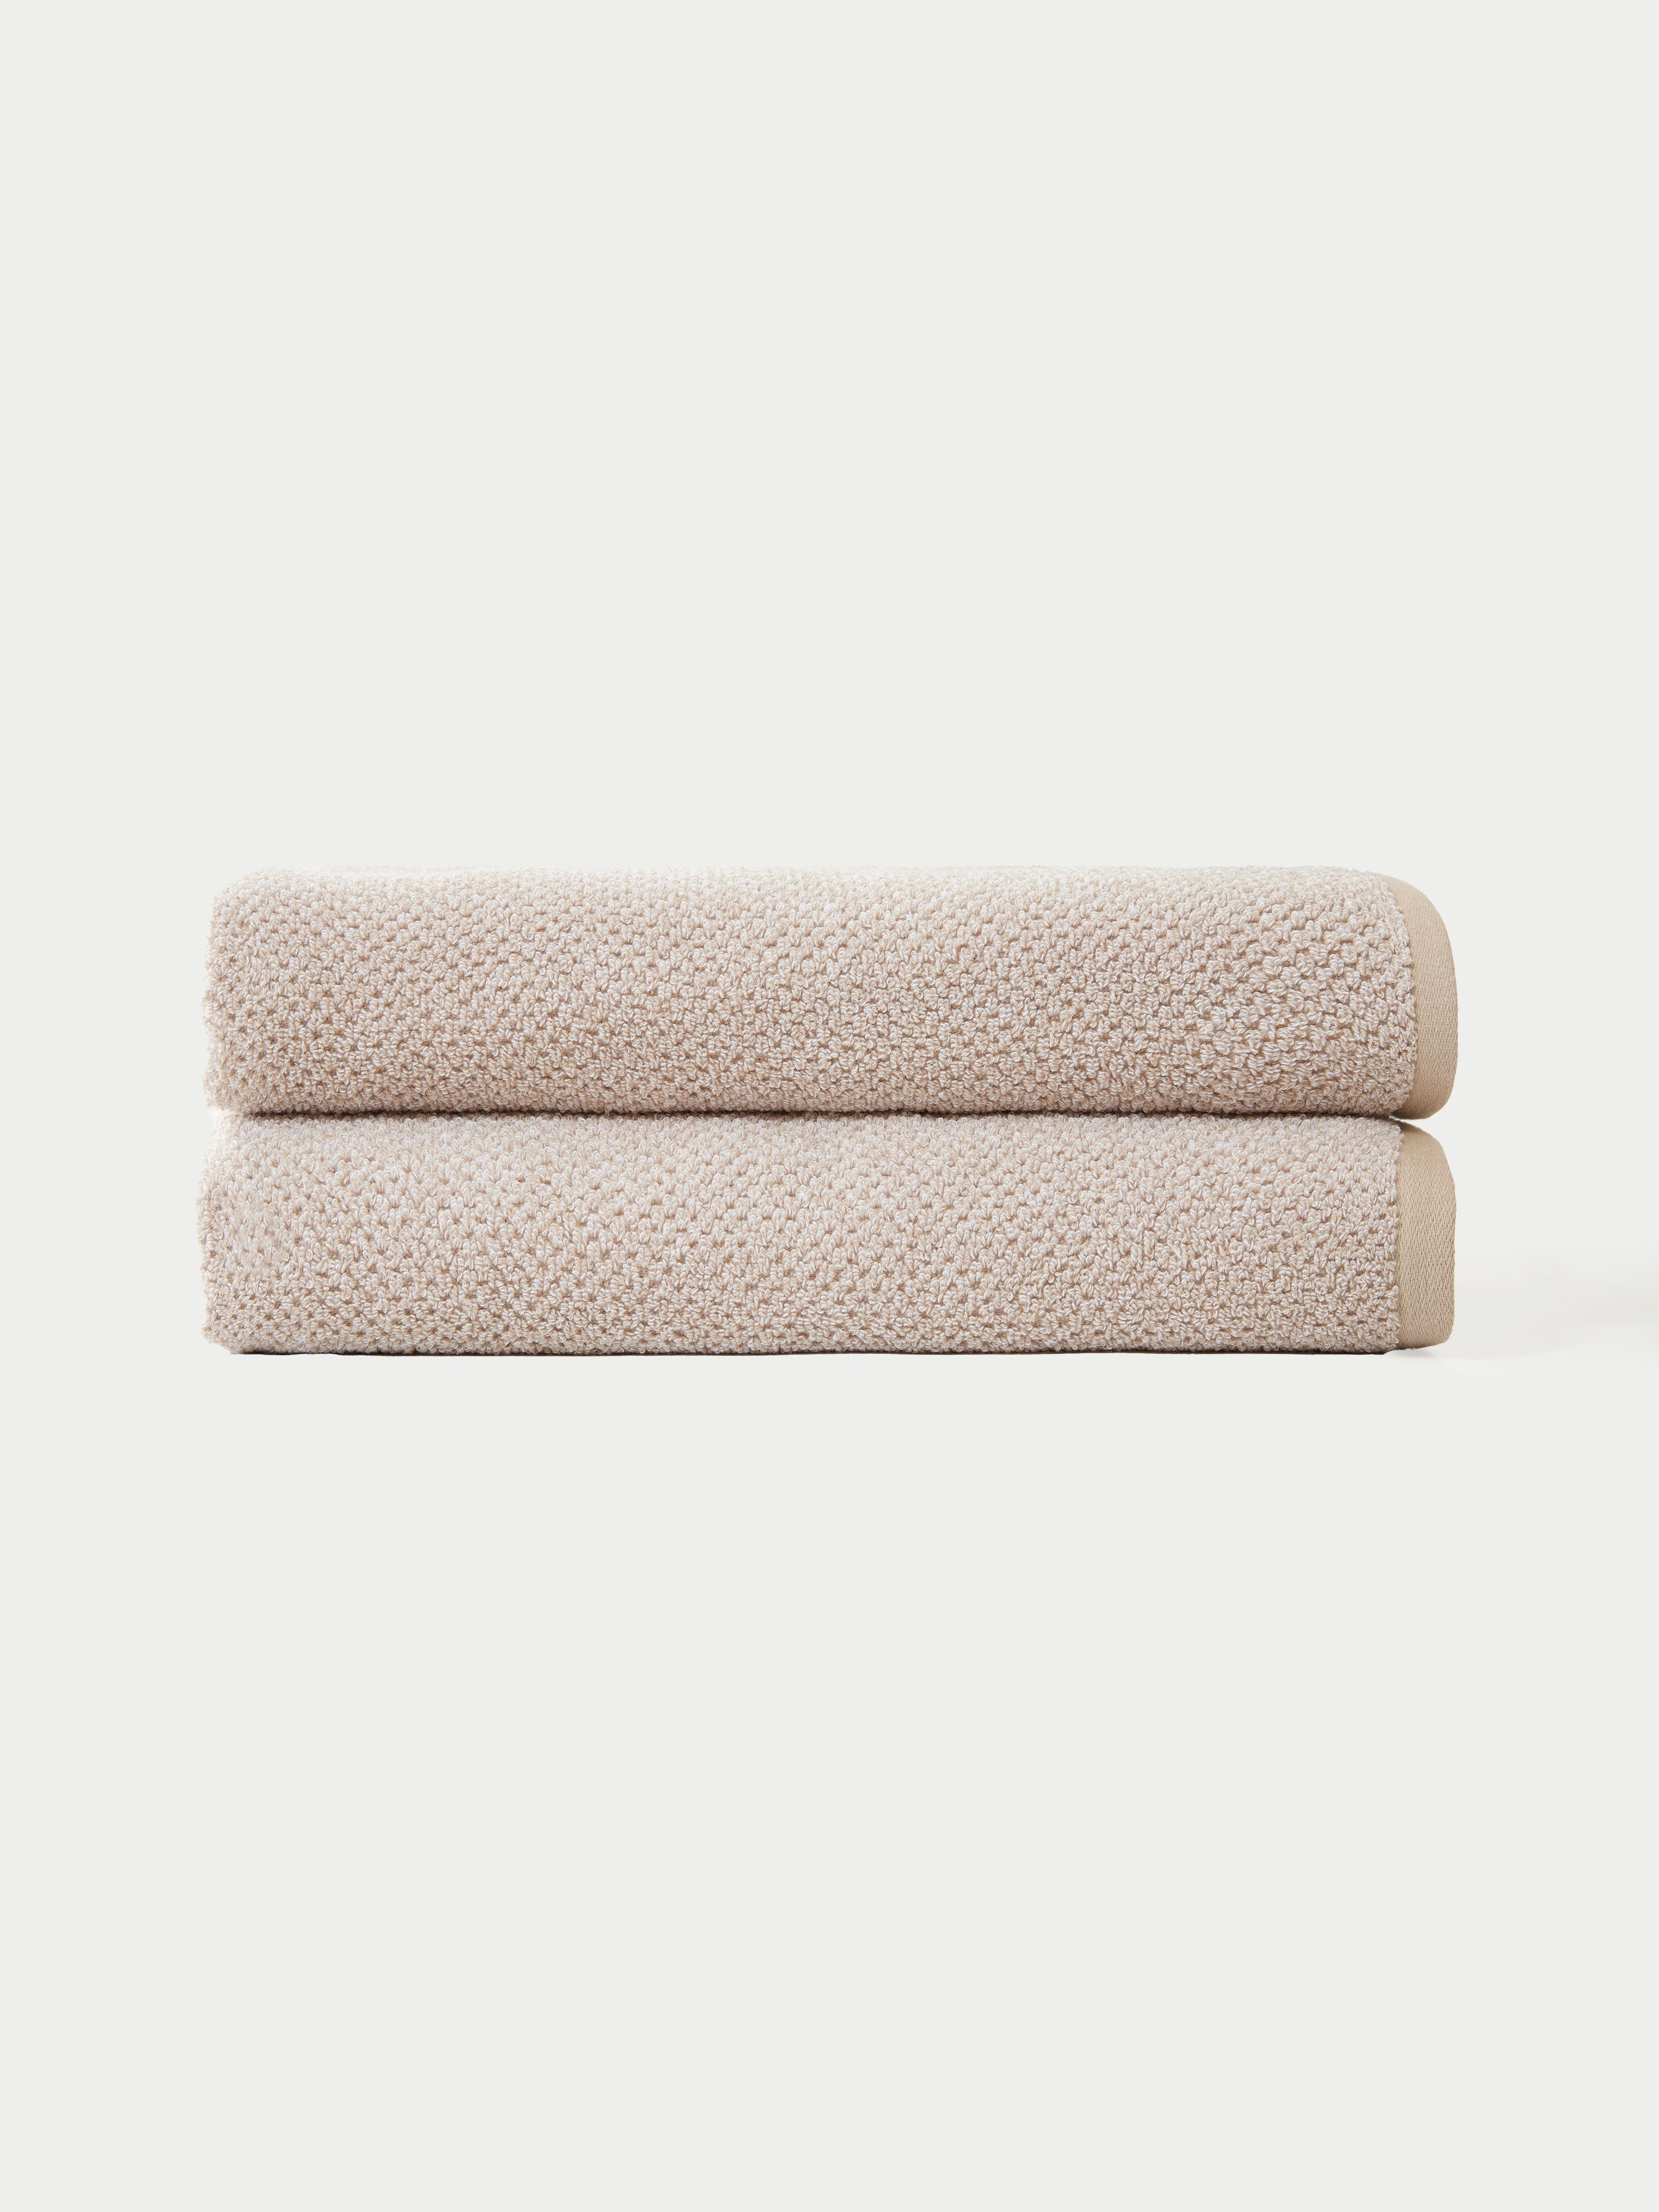 Nantucket Bath Sheets in the color Heathered Sand. The bath sheets are neatly folded. The photo of the bath sheets was taken with a white background.|Color:Heathered Sand